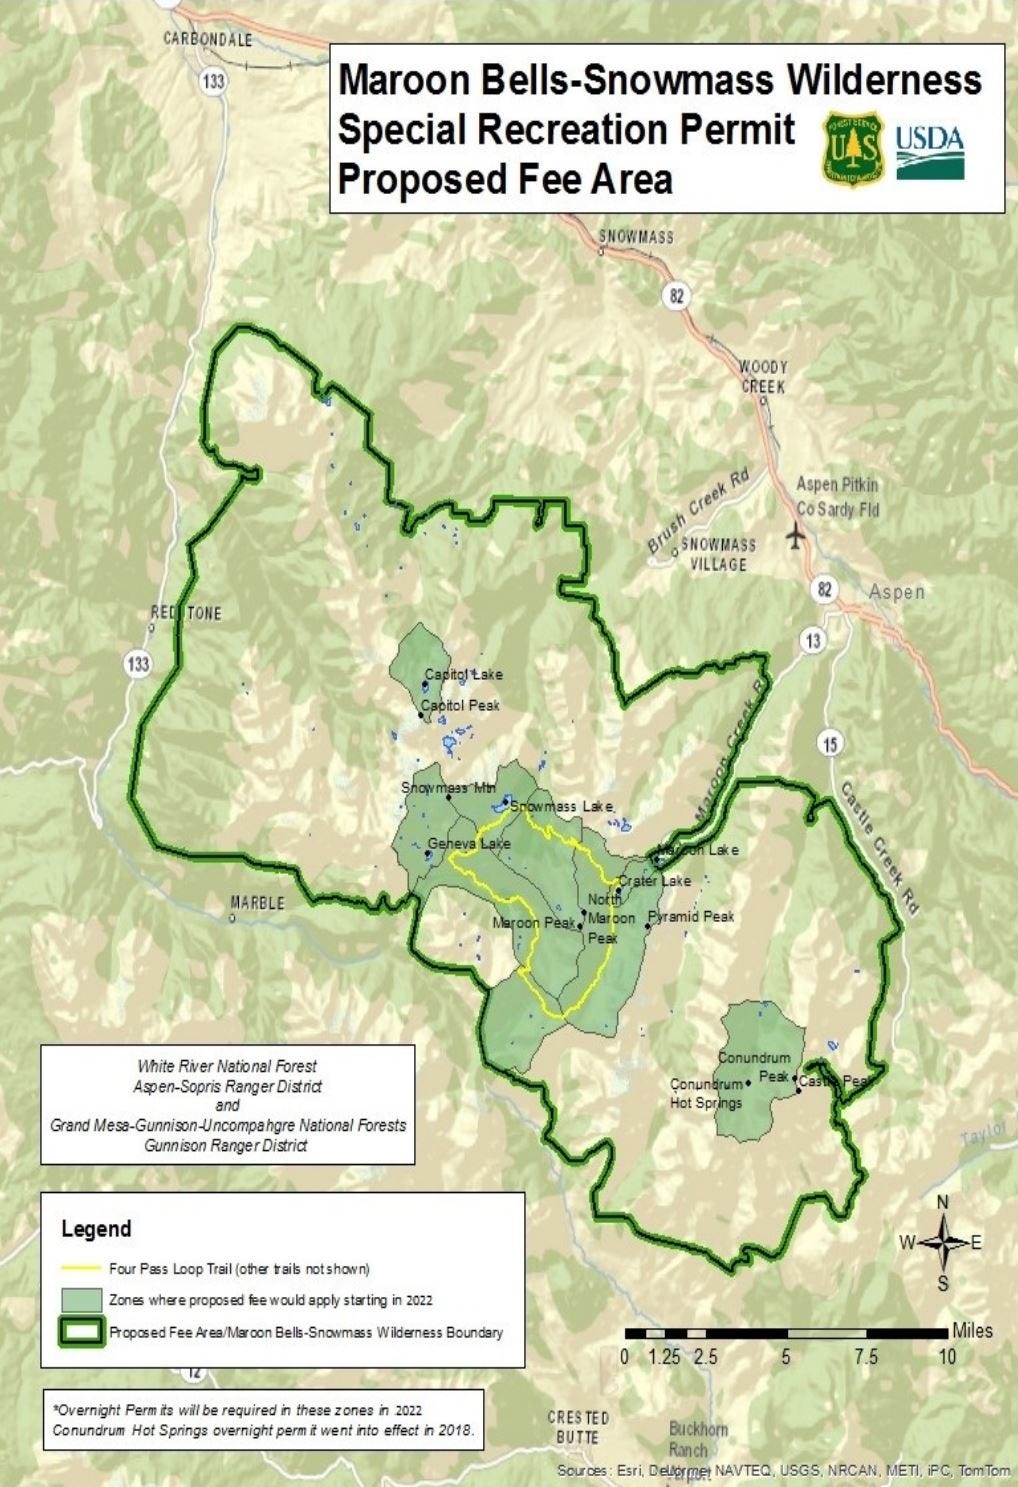 A map of the Maroon Bells-Snowmass wilderness. Outlined and highlighted are the areas that would become fee-to-access